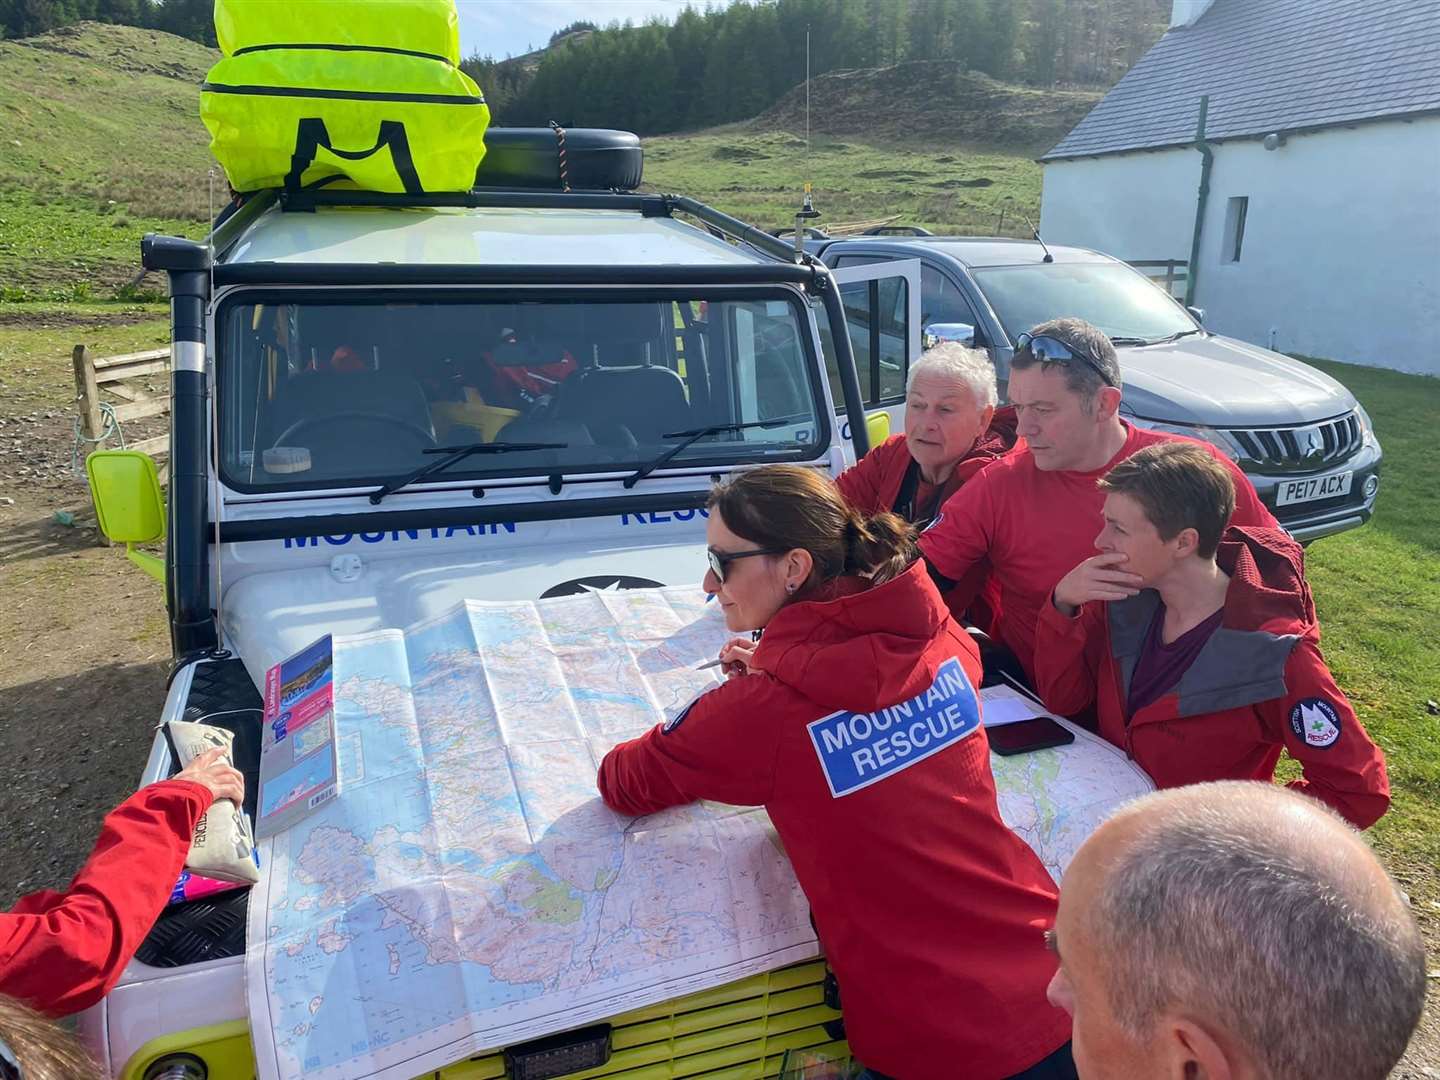 The Assynt team has been covering the ground in the ongoing hunt using a variety of methods. Picture: Assynt Mountain Rescue Team